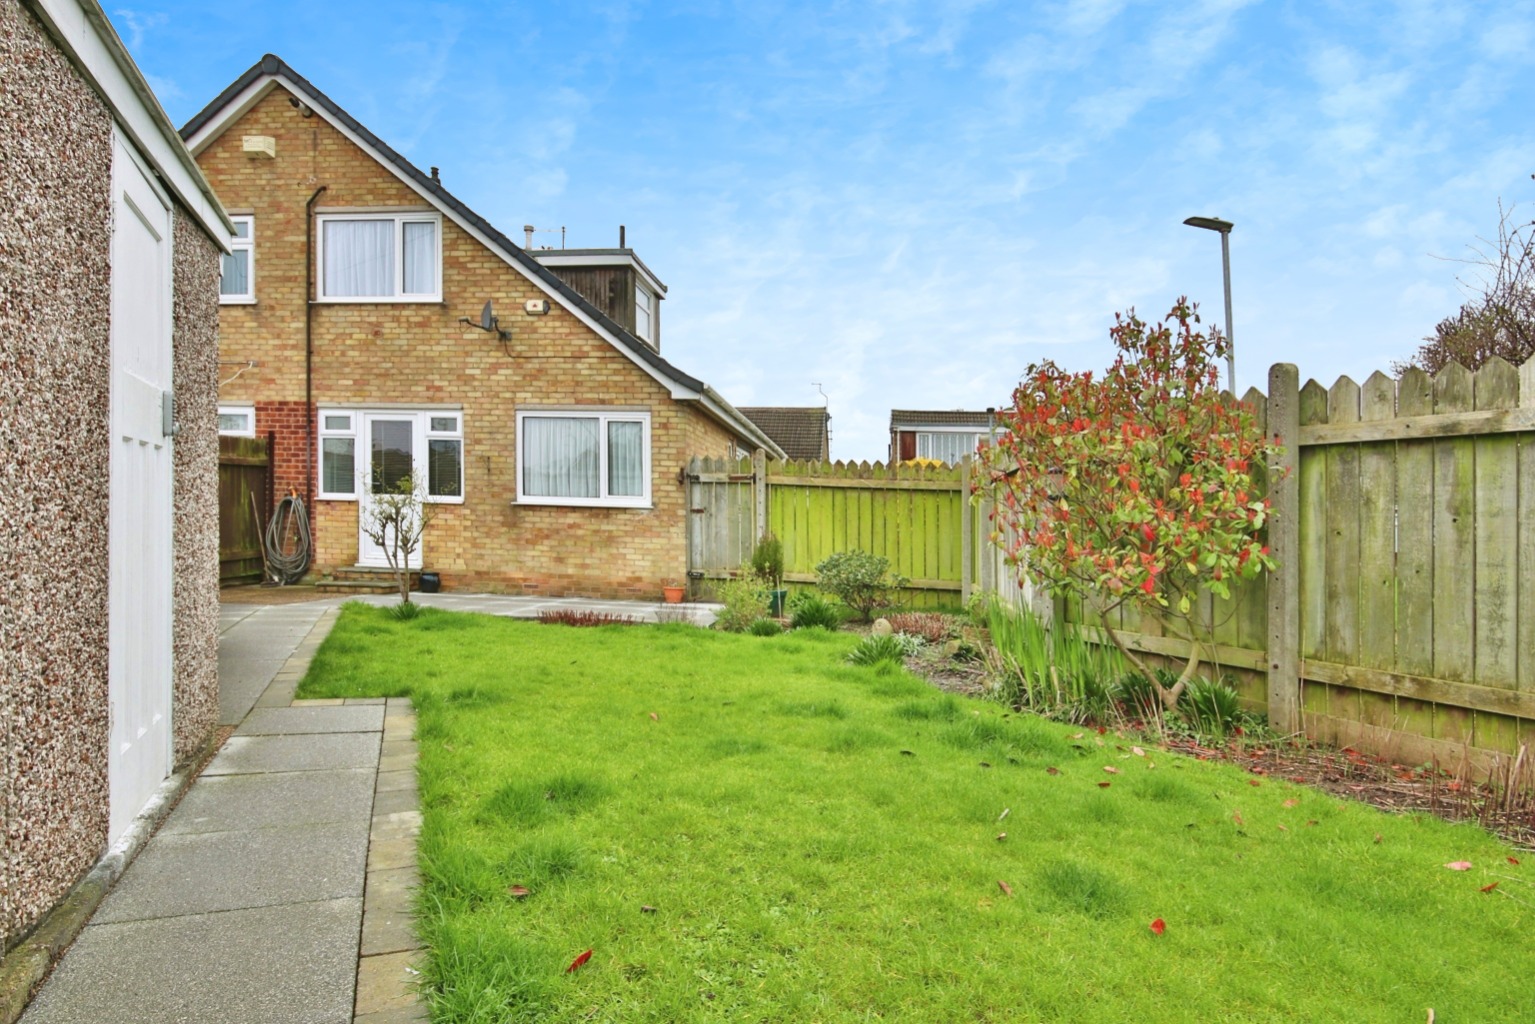 3 bed semi-detached house for sale in Grandale, Hull - Property Image 1